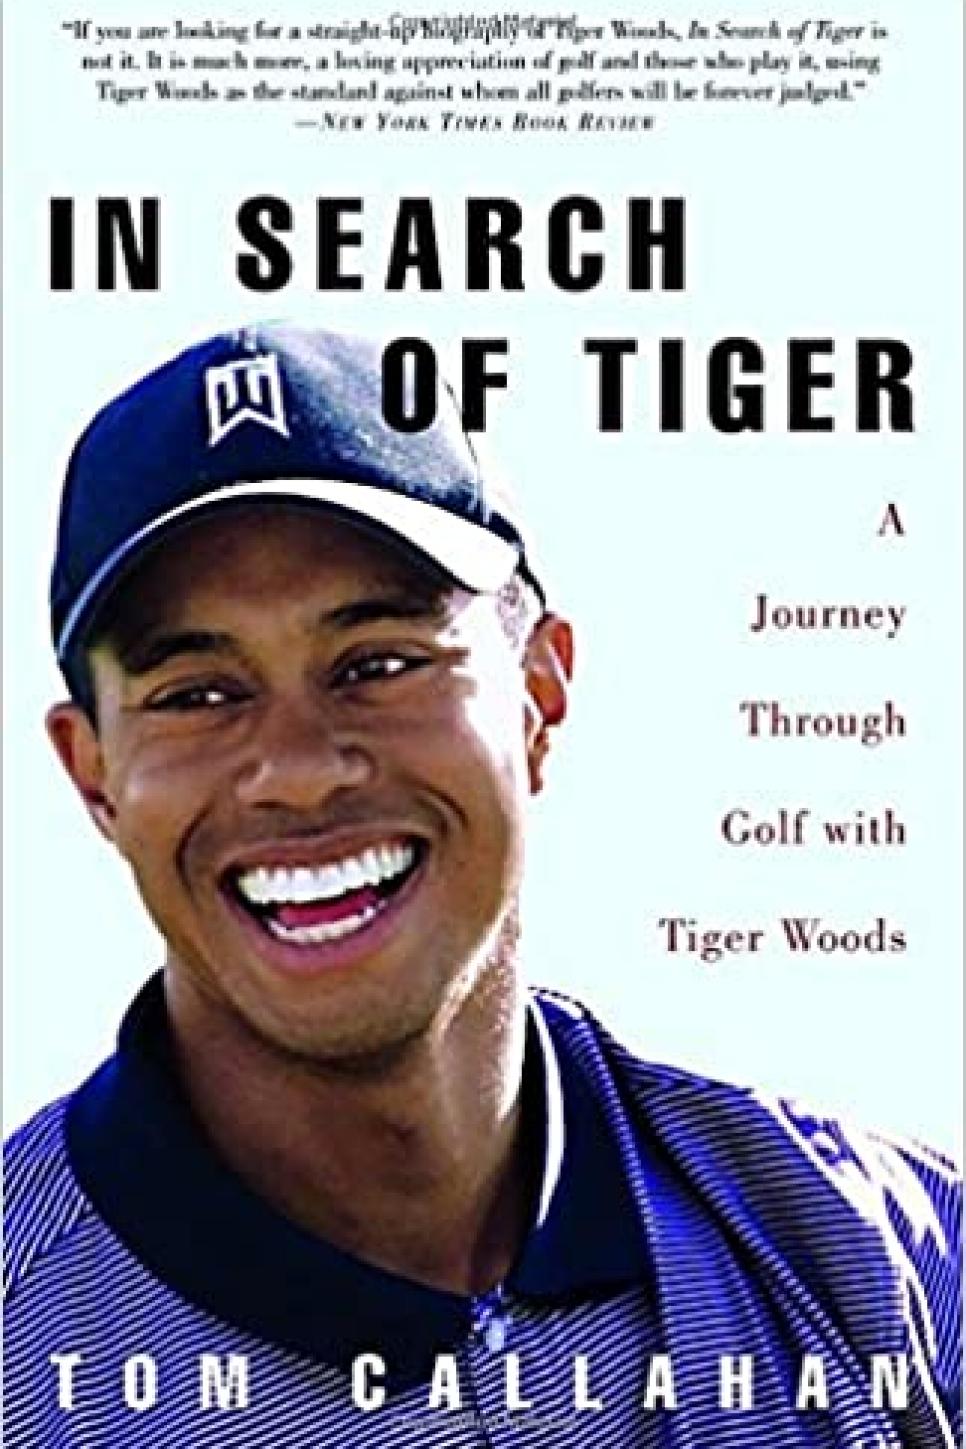 rx-amazonin-search-of-tiger-a-journey-through-golf-with-tiger-woods-by-tom-callahan-2003.jpeg